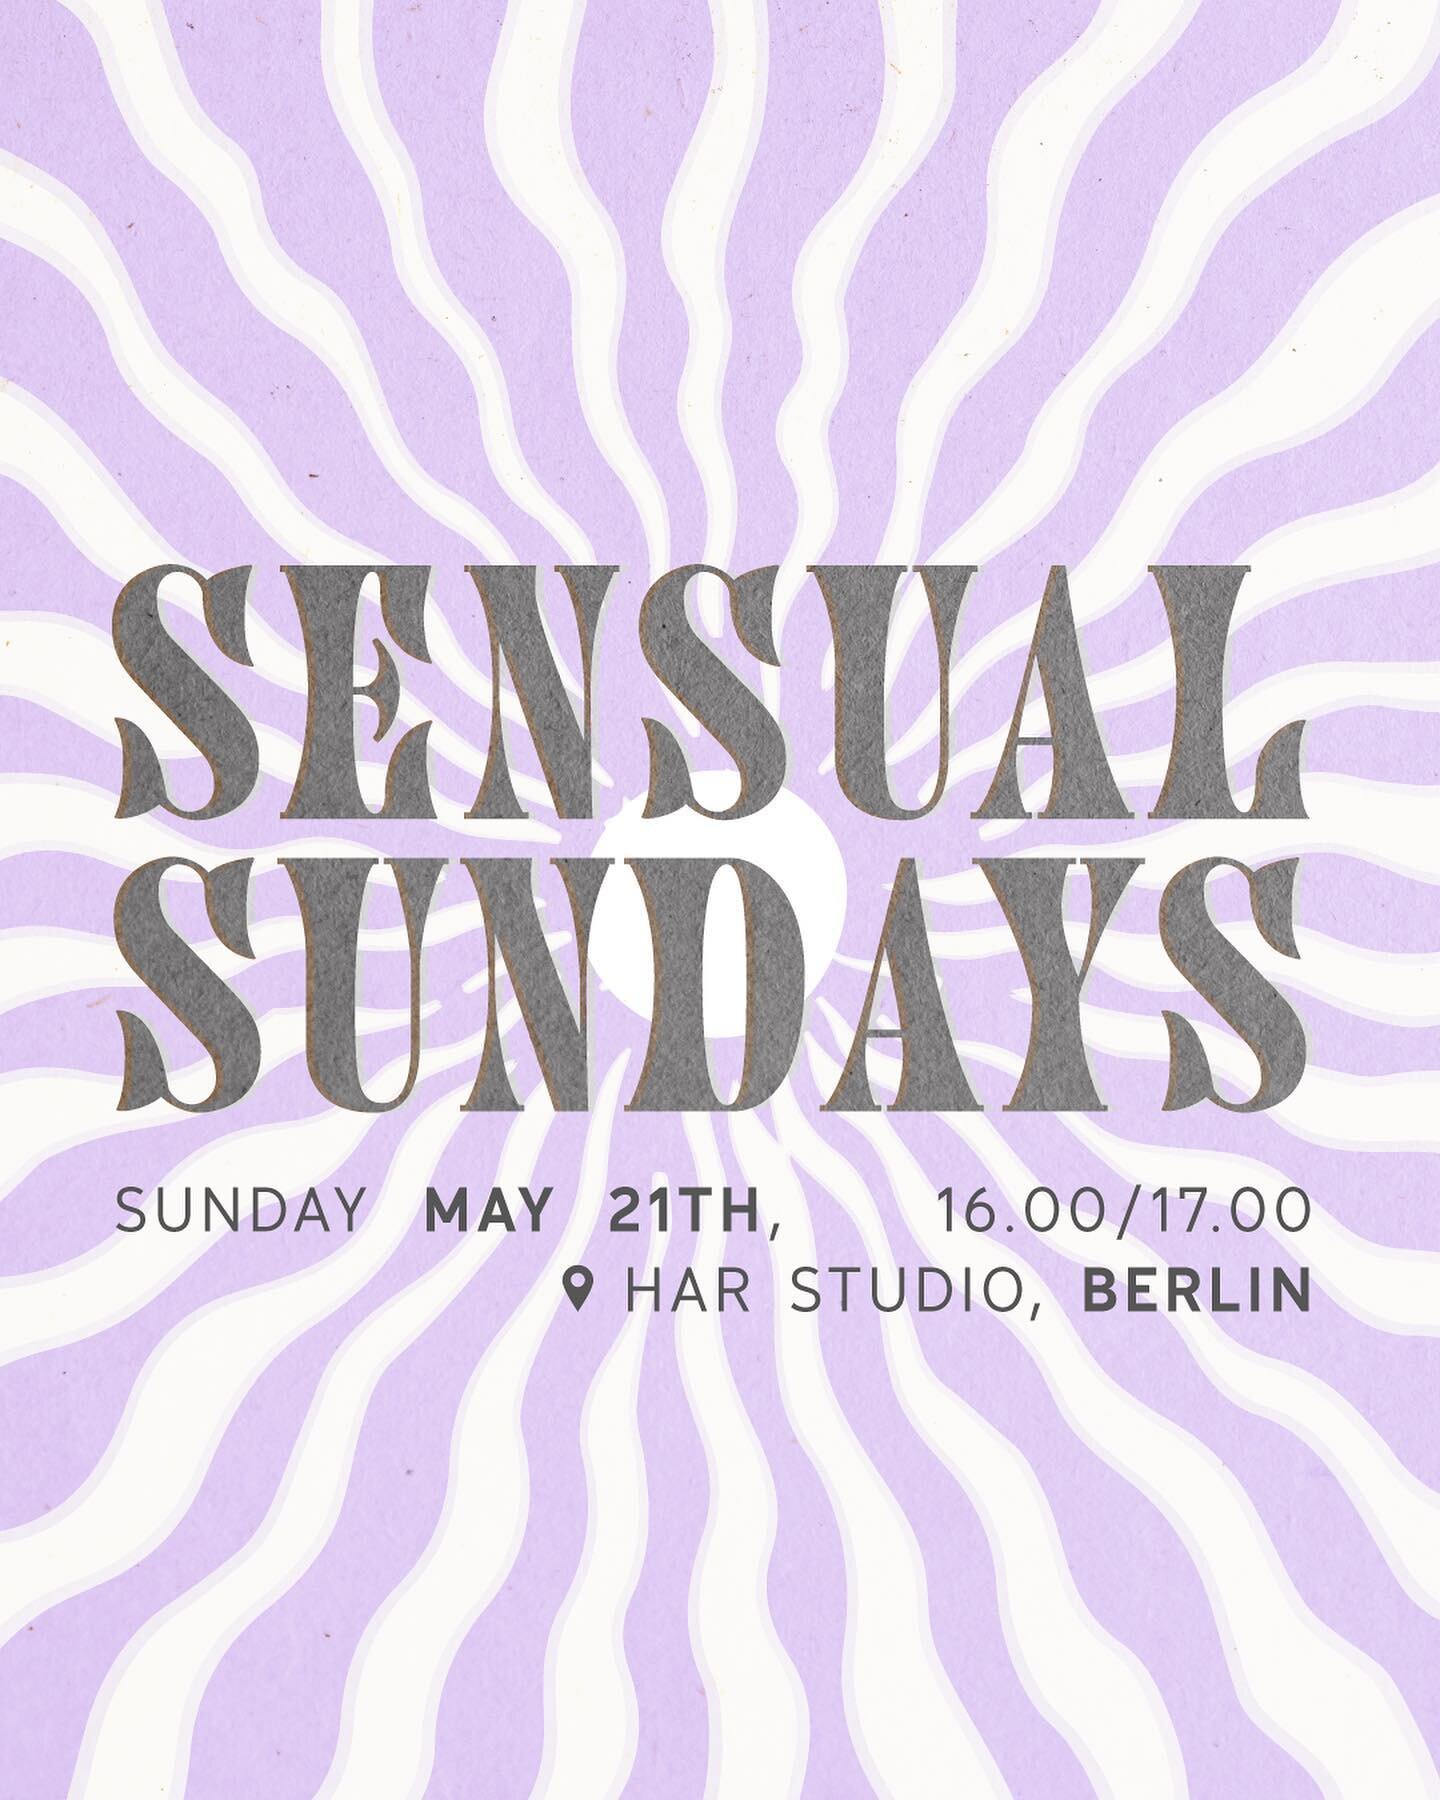 tomorrow🌈 
let&rsquo;s move our bodies and sweat all of our tears away at sensual Sunday sesh at @_har_studio_ 

I&rsquo;m making a playlist that serves to heal a broken heart whilst laughing at the cosmic joke of it all.
-a sweet sesh for those who